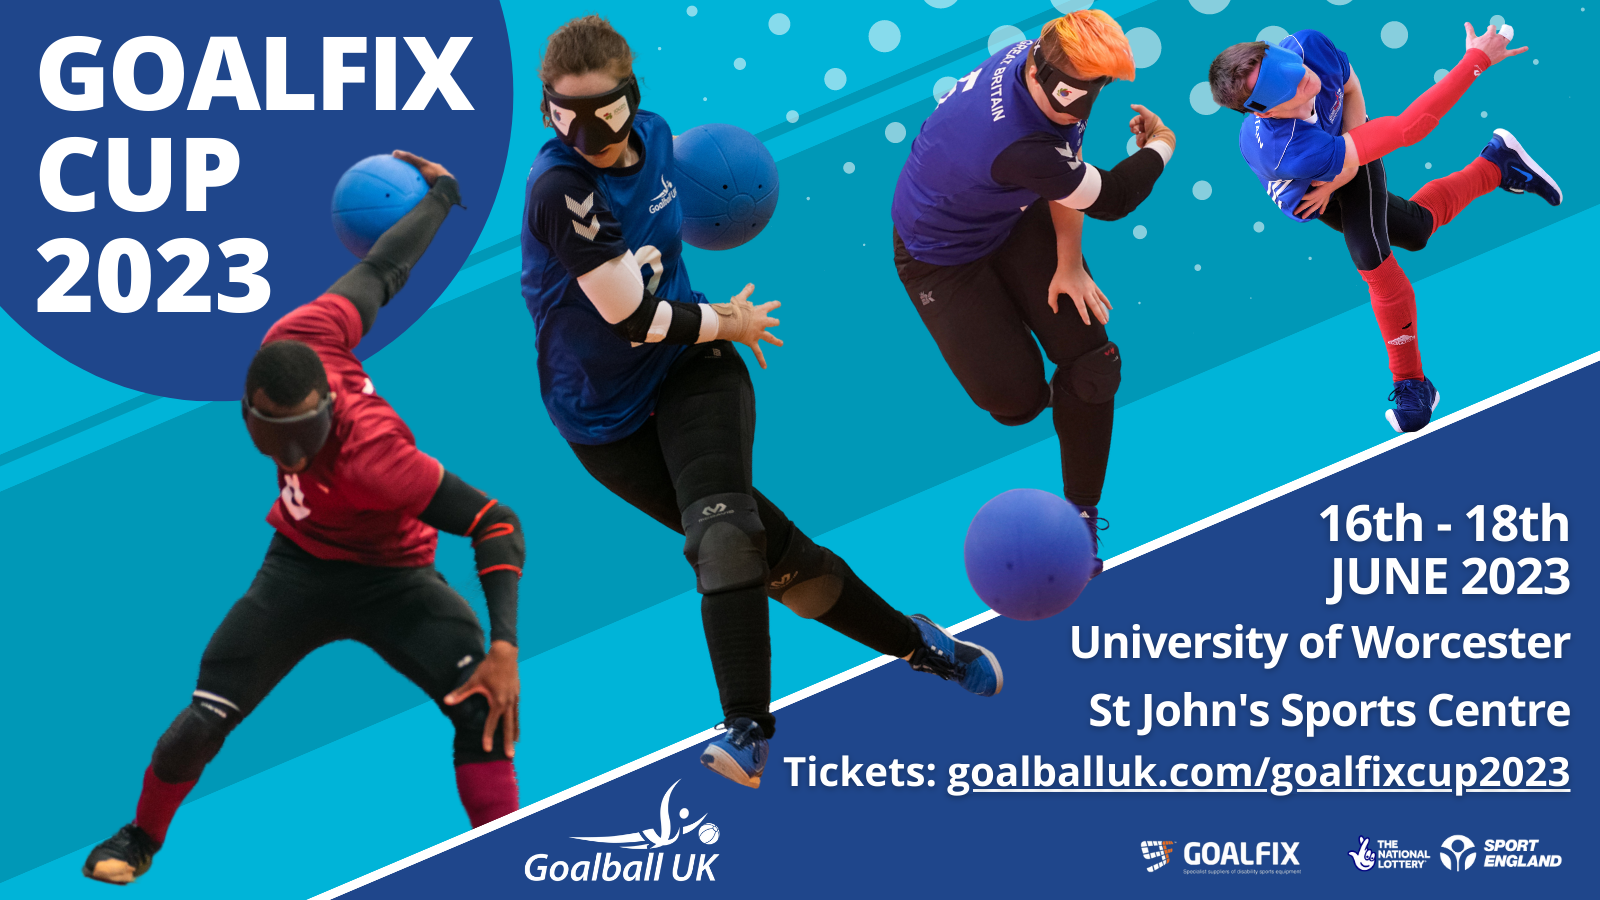 Promotional graphic showing the details of the Goalfix Cup 2023 on a blue background with cut out goalball players in the centre